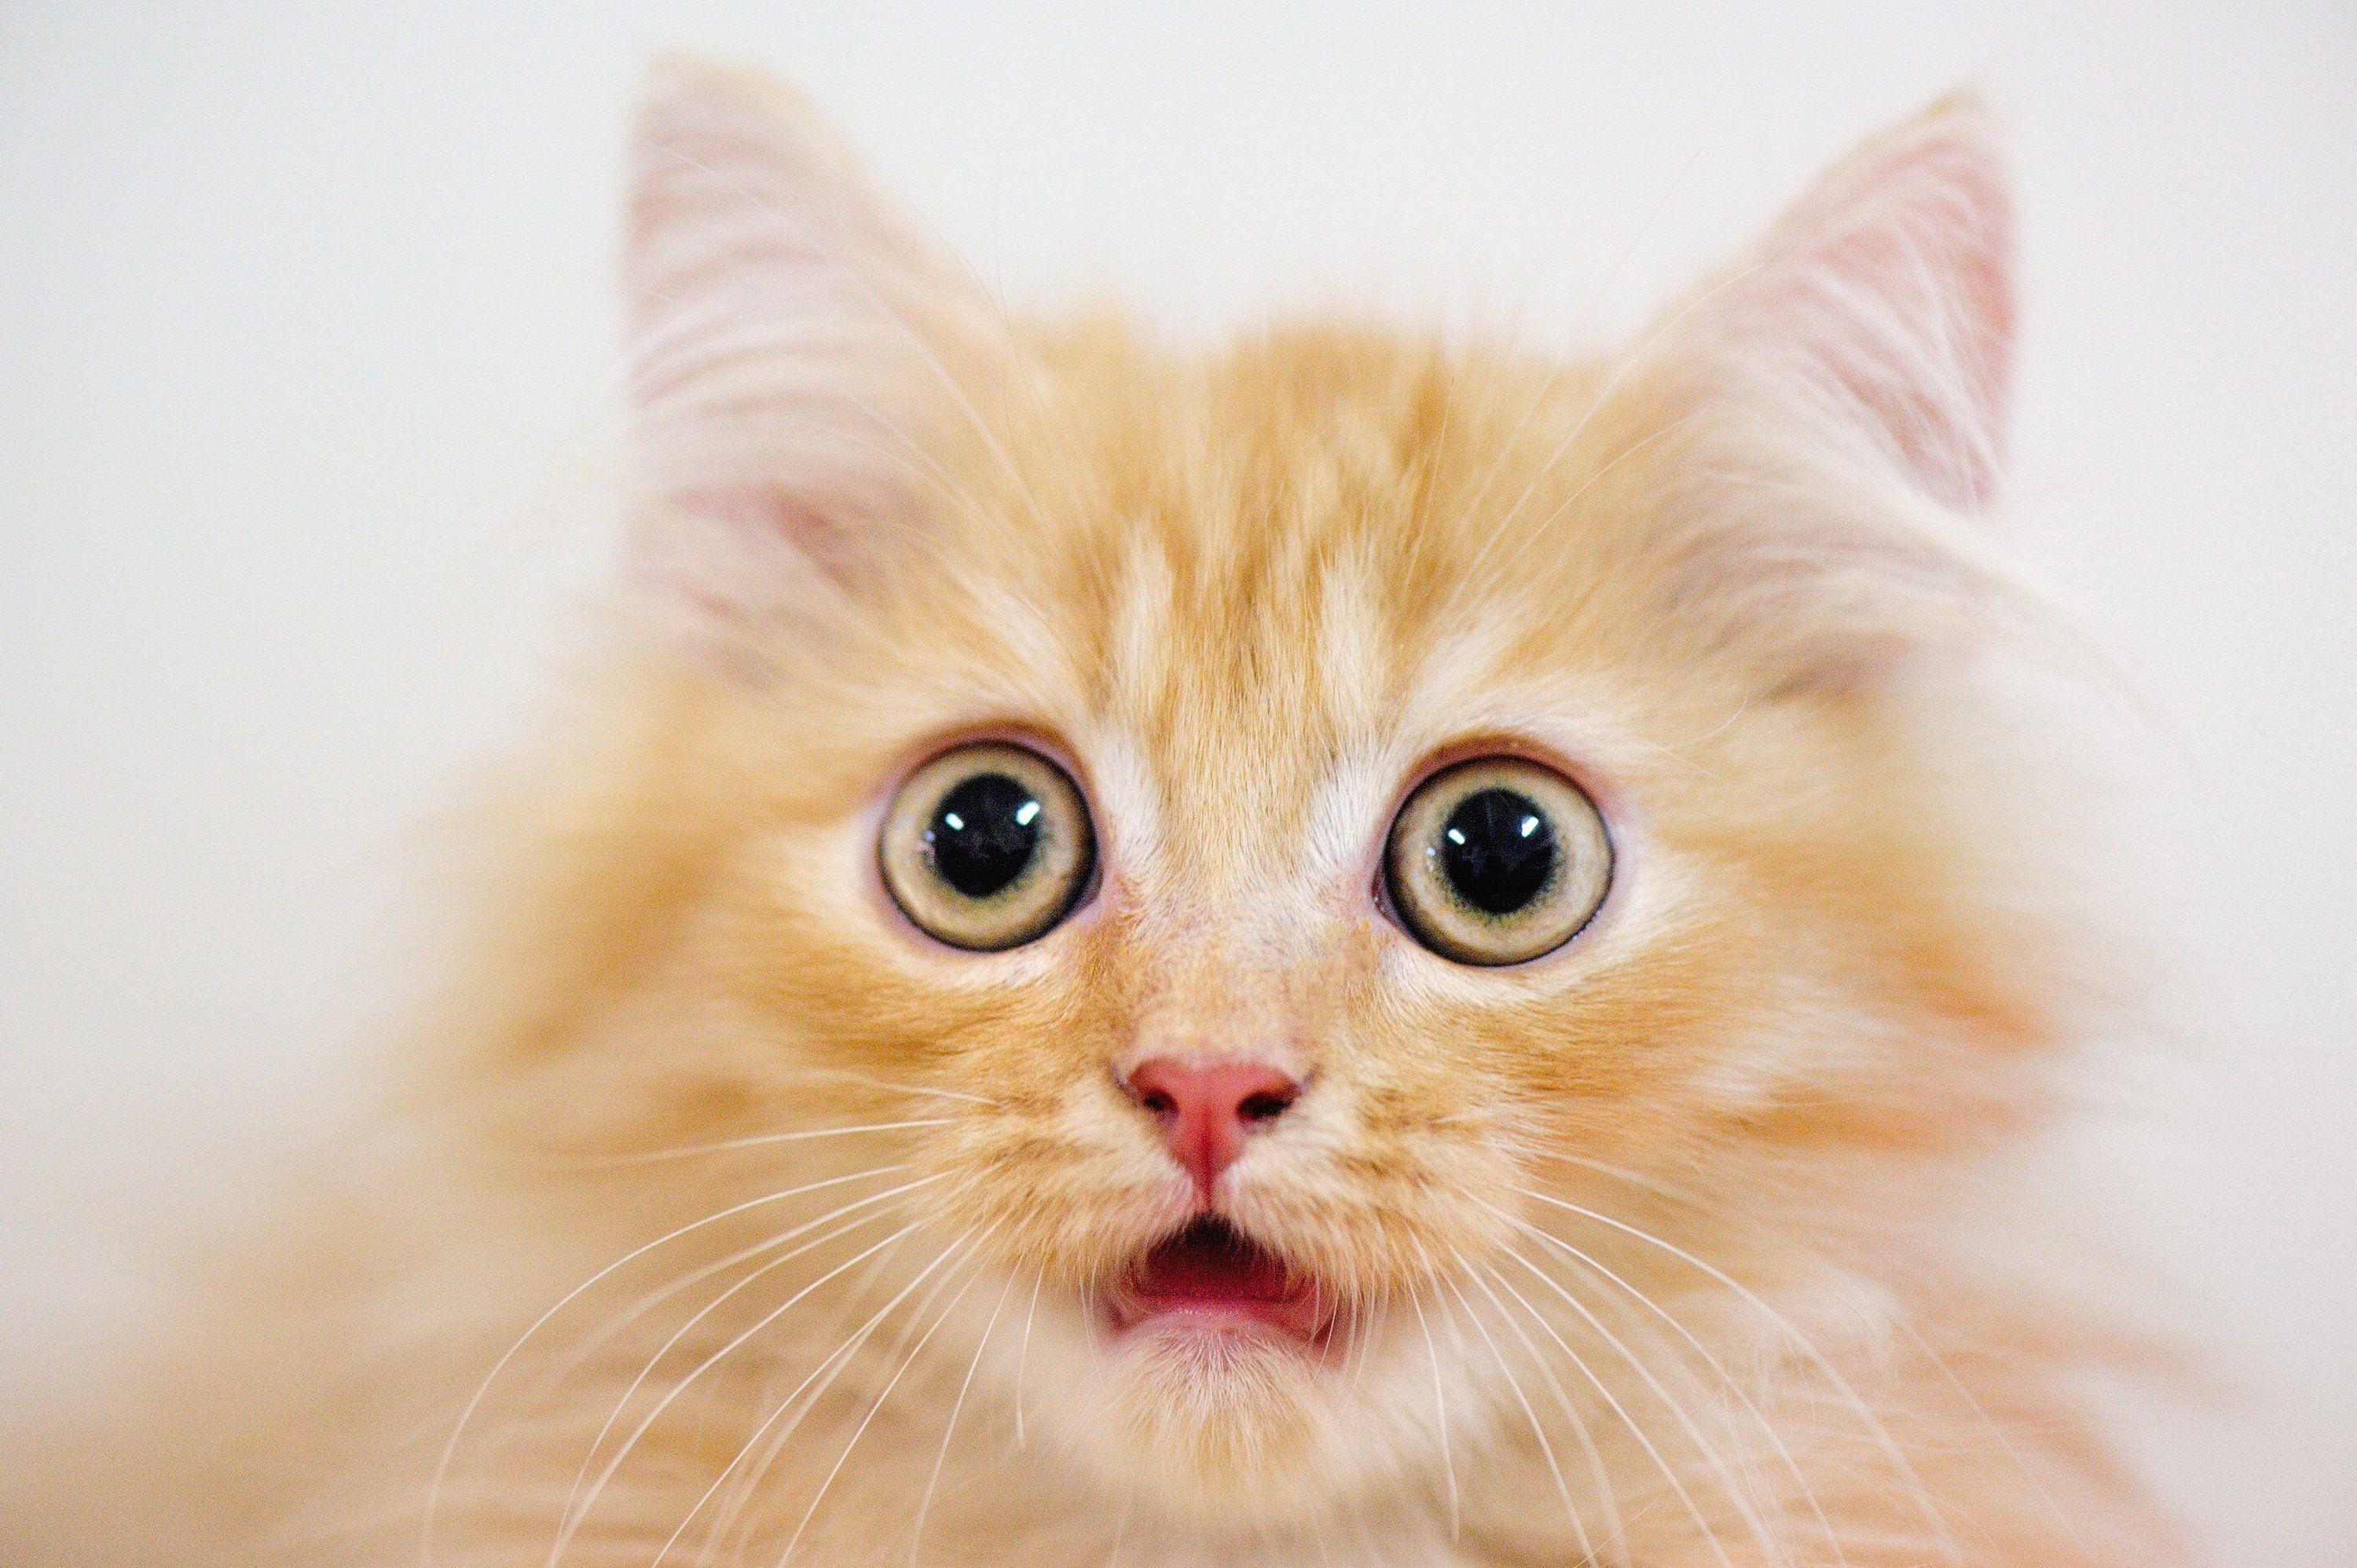 a photograph of an orange cat's face, looking shocked